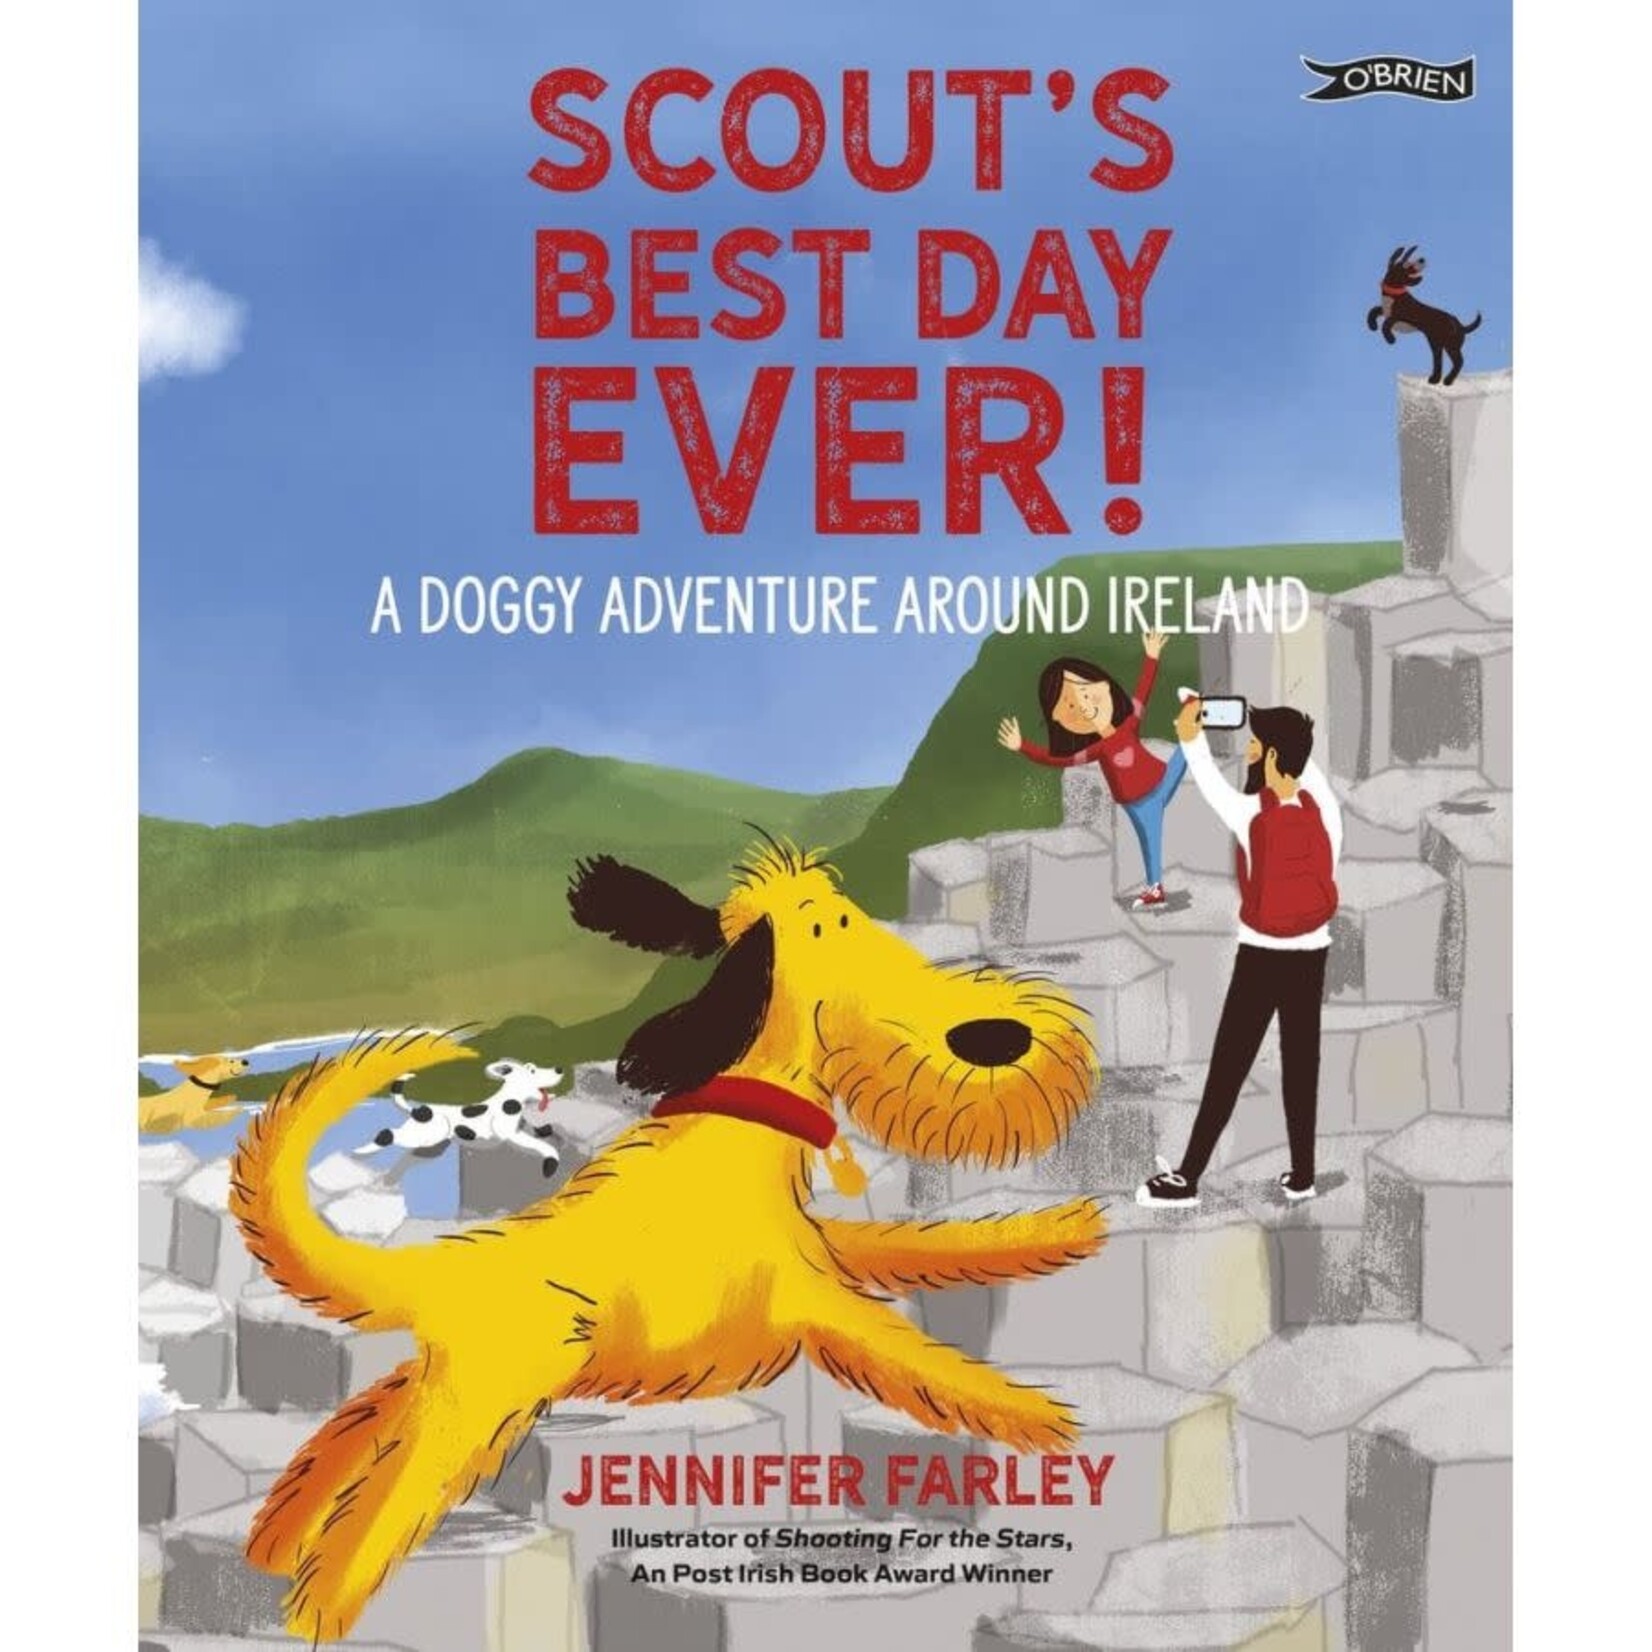 Celtic Books "Scout's Best Day Ever" by Jennifer Farley